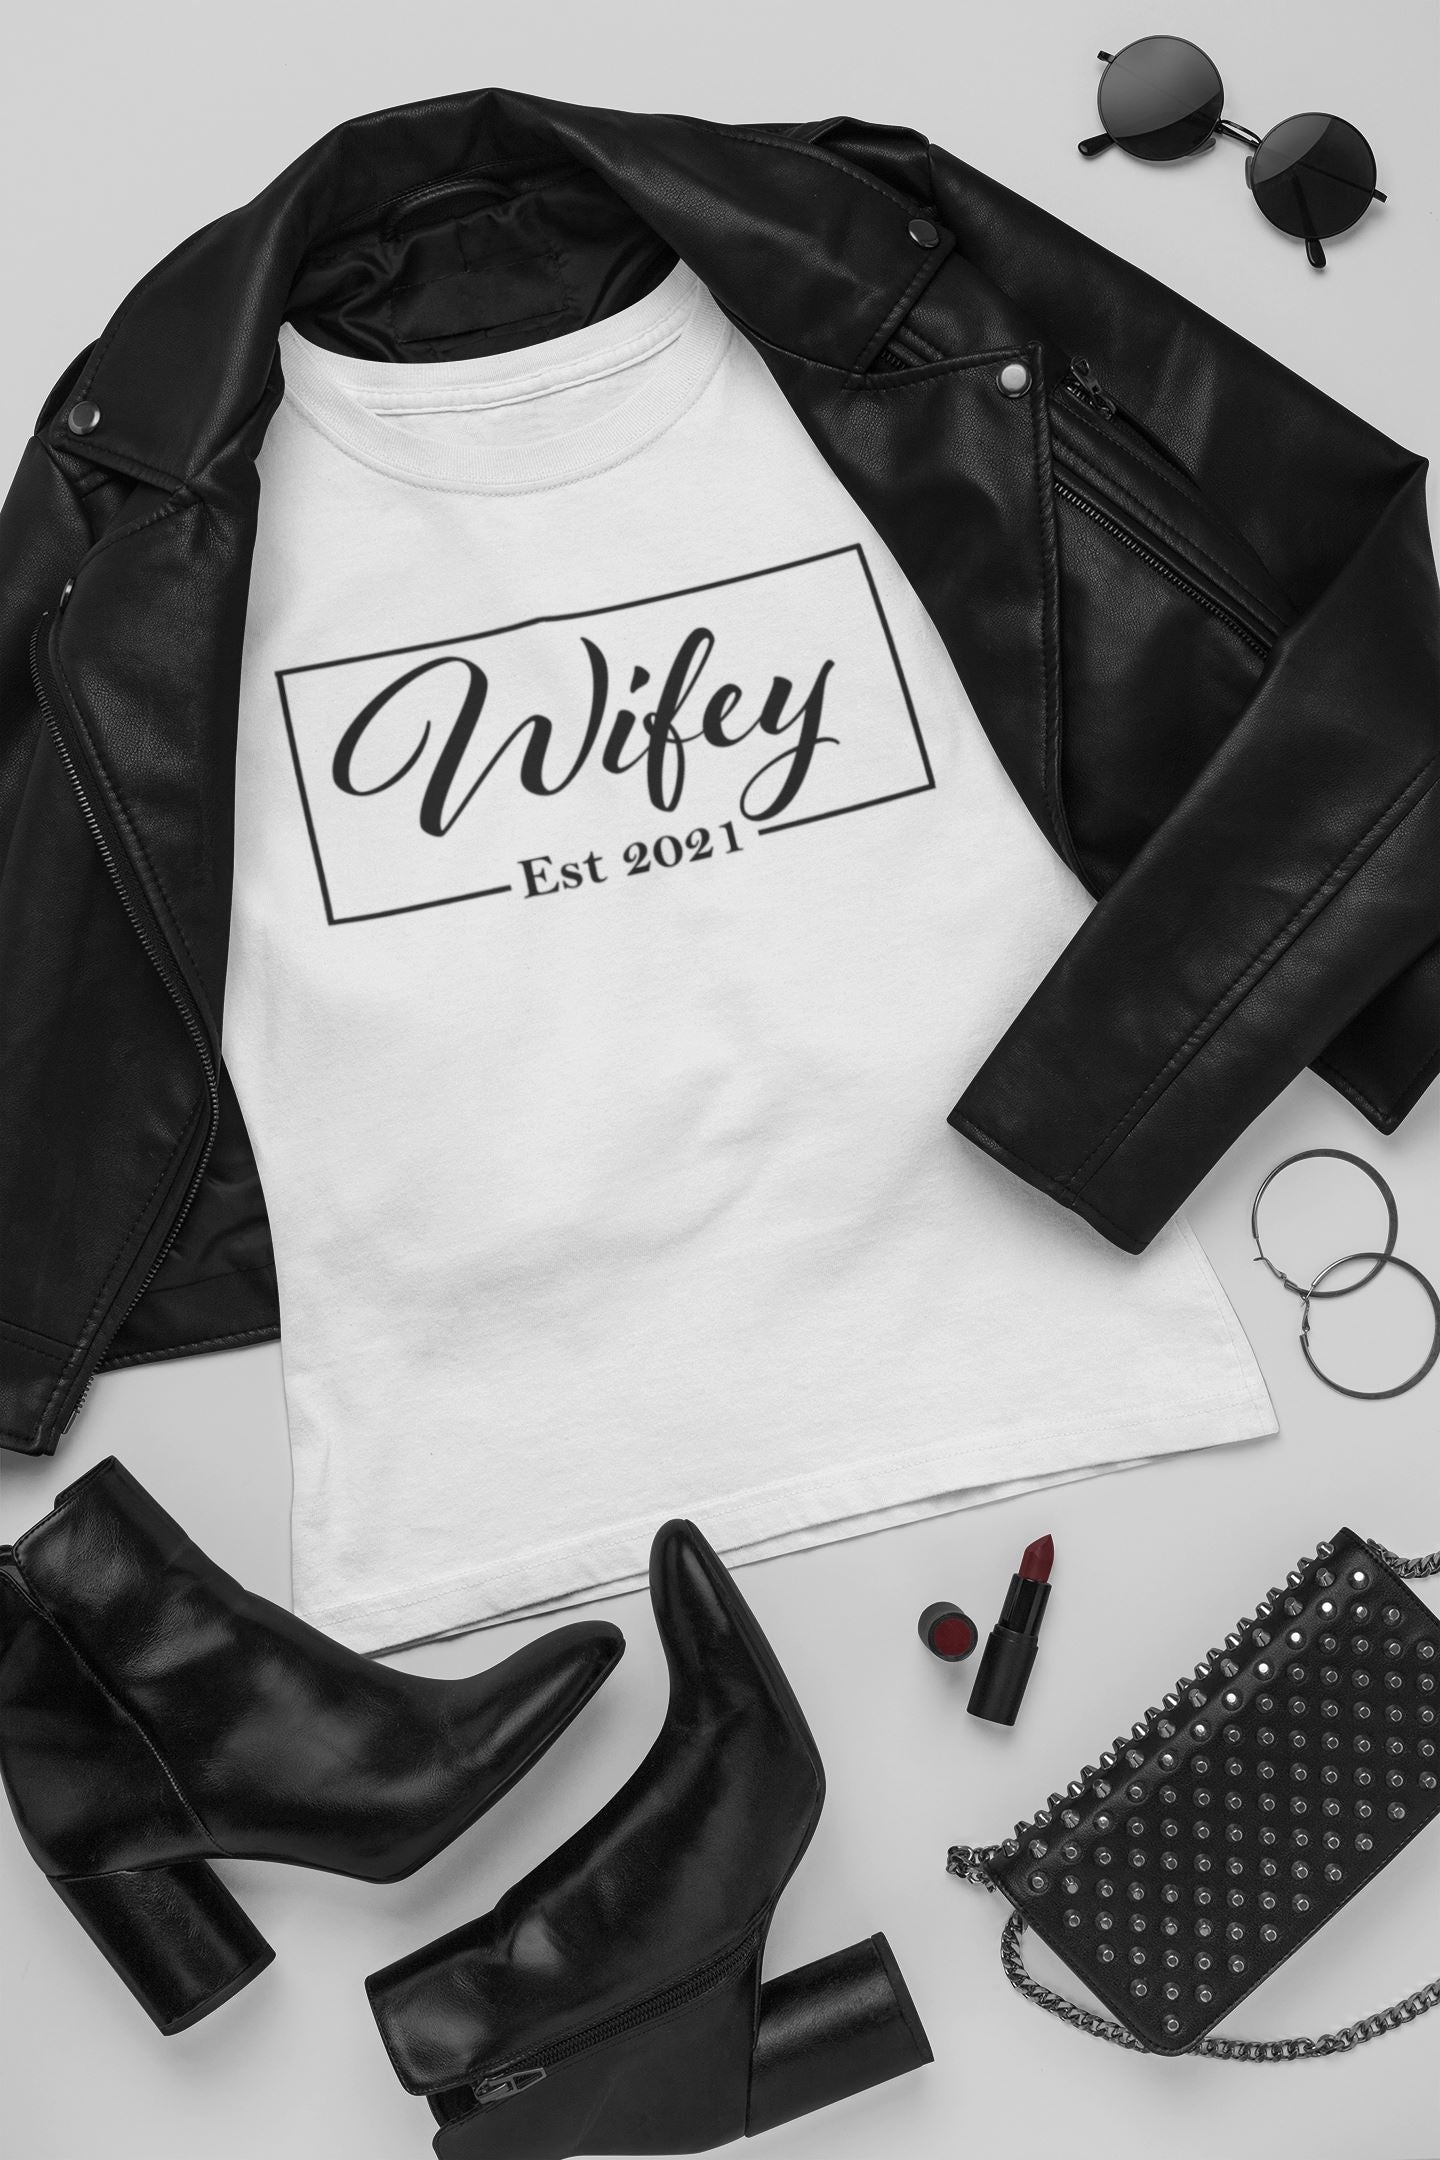 Hubby Wifey Personalised T-shirt